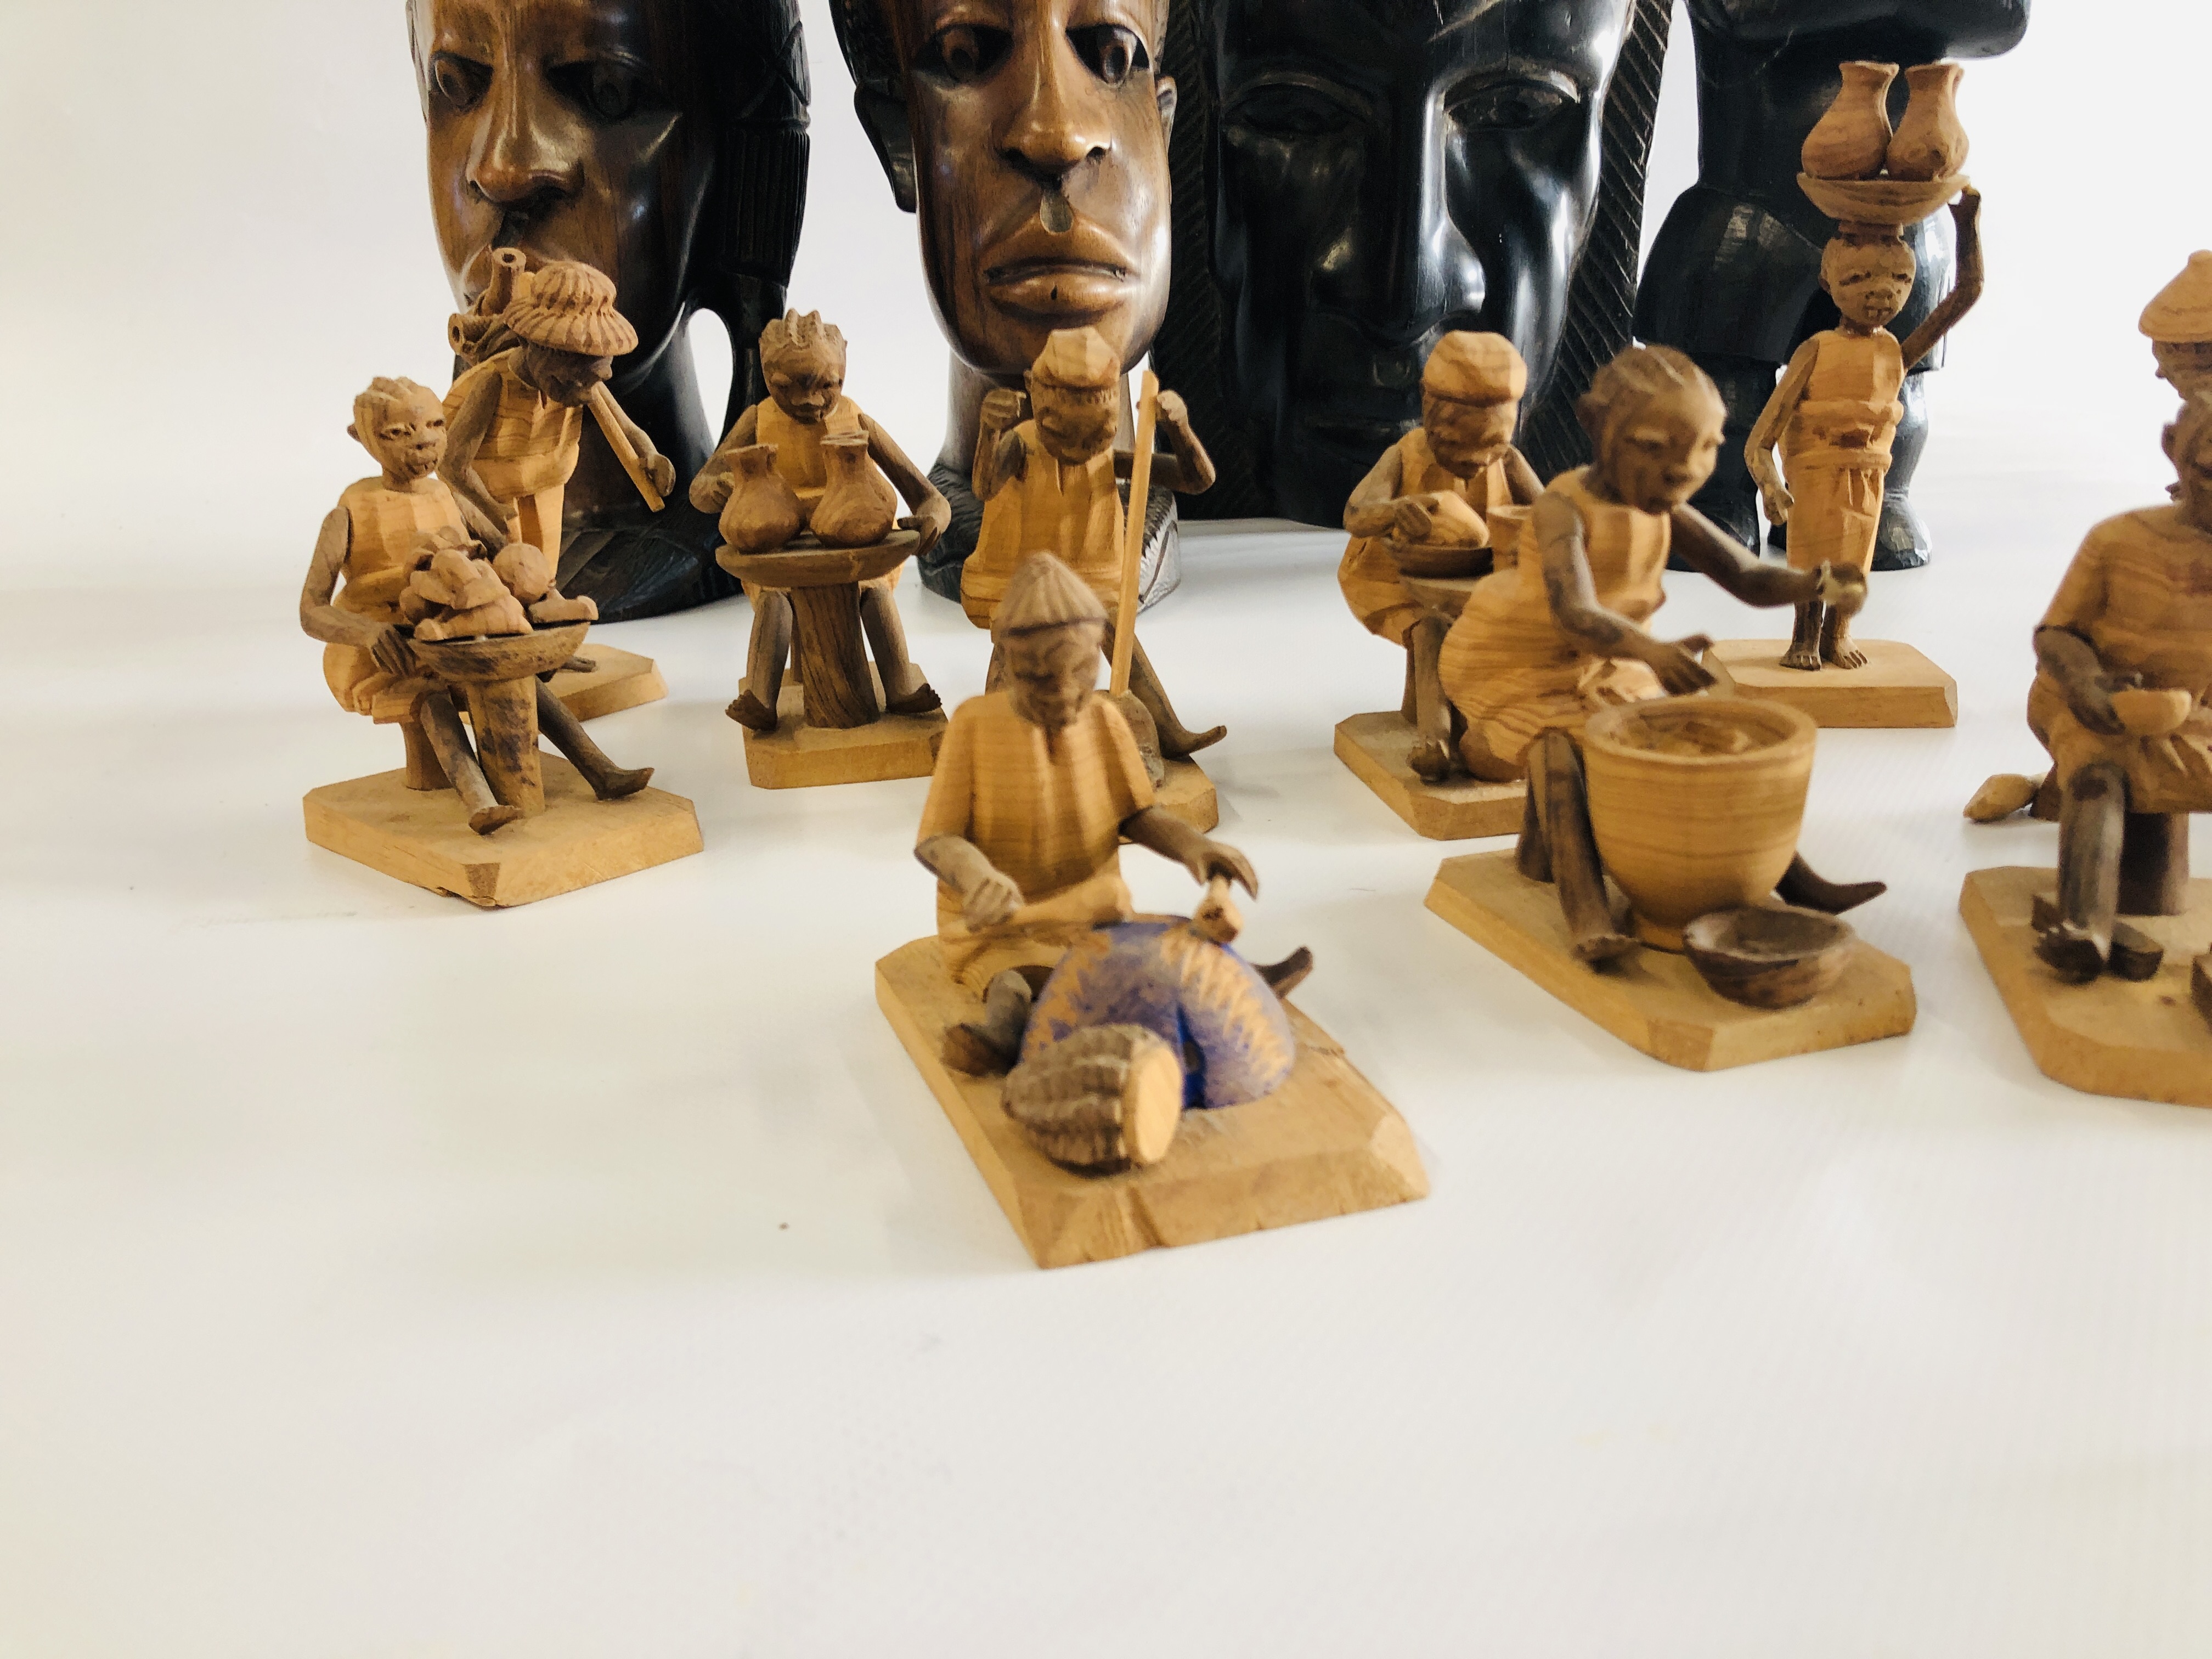 4 HARDWOOD STUDIES TO INCLUDE BUSTS ALONG WITH A GROUP OF TERRACOTTA WORKING FIGURES. - Image 2 of 6